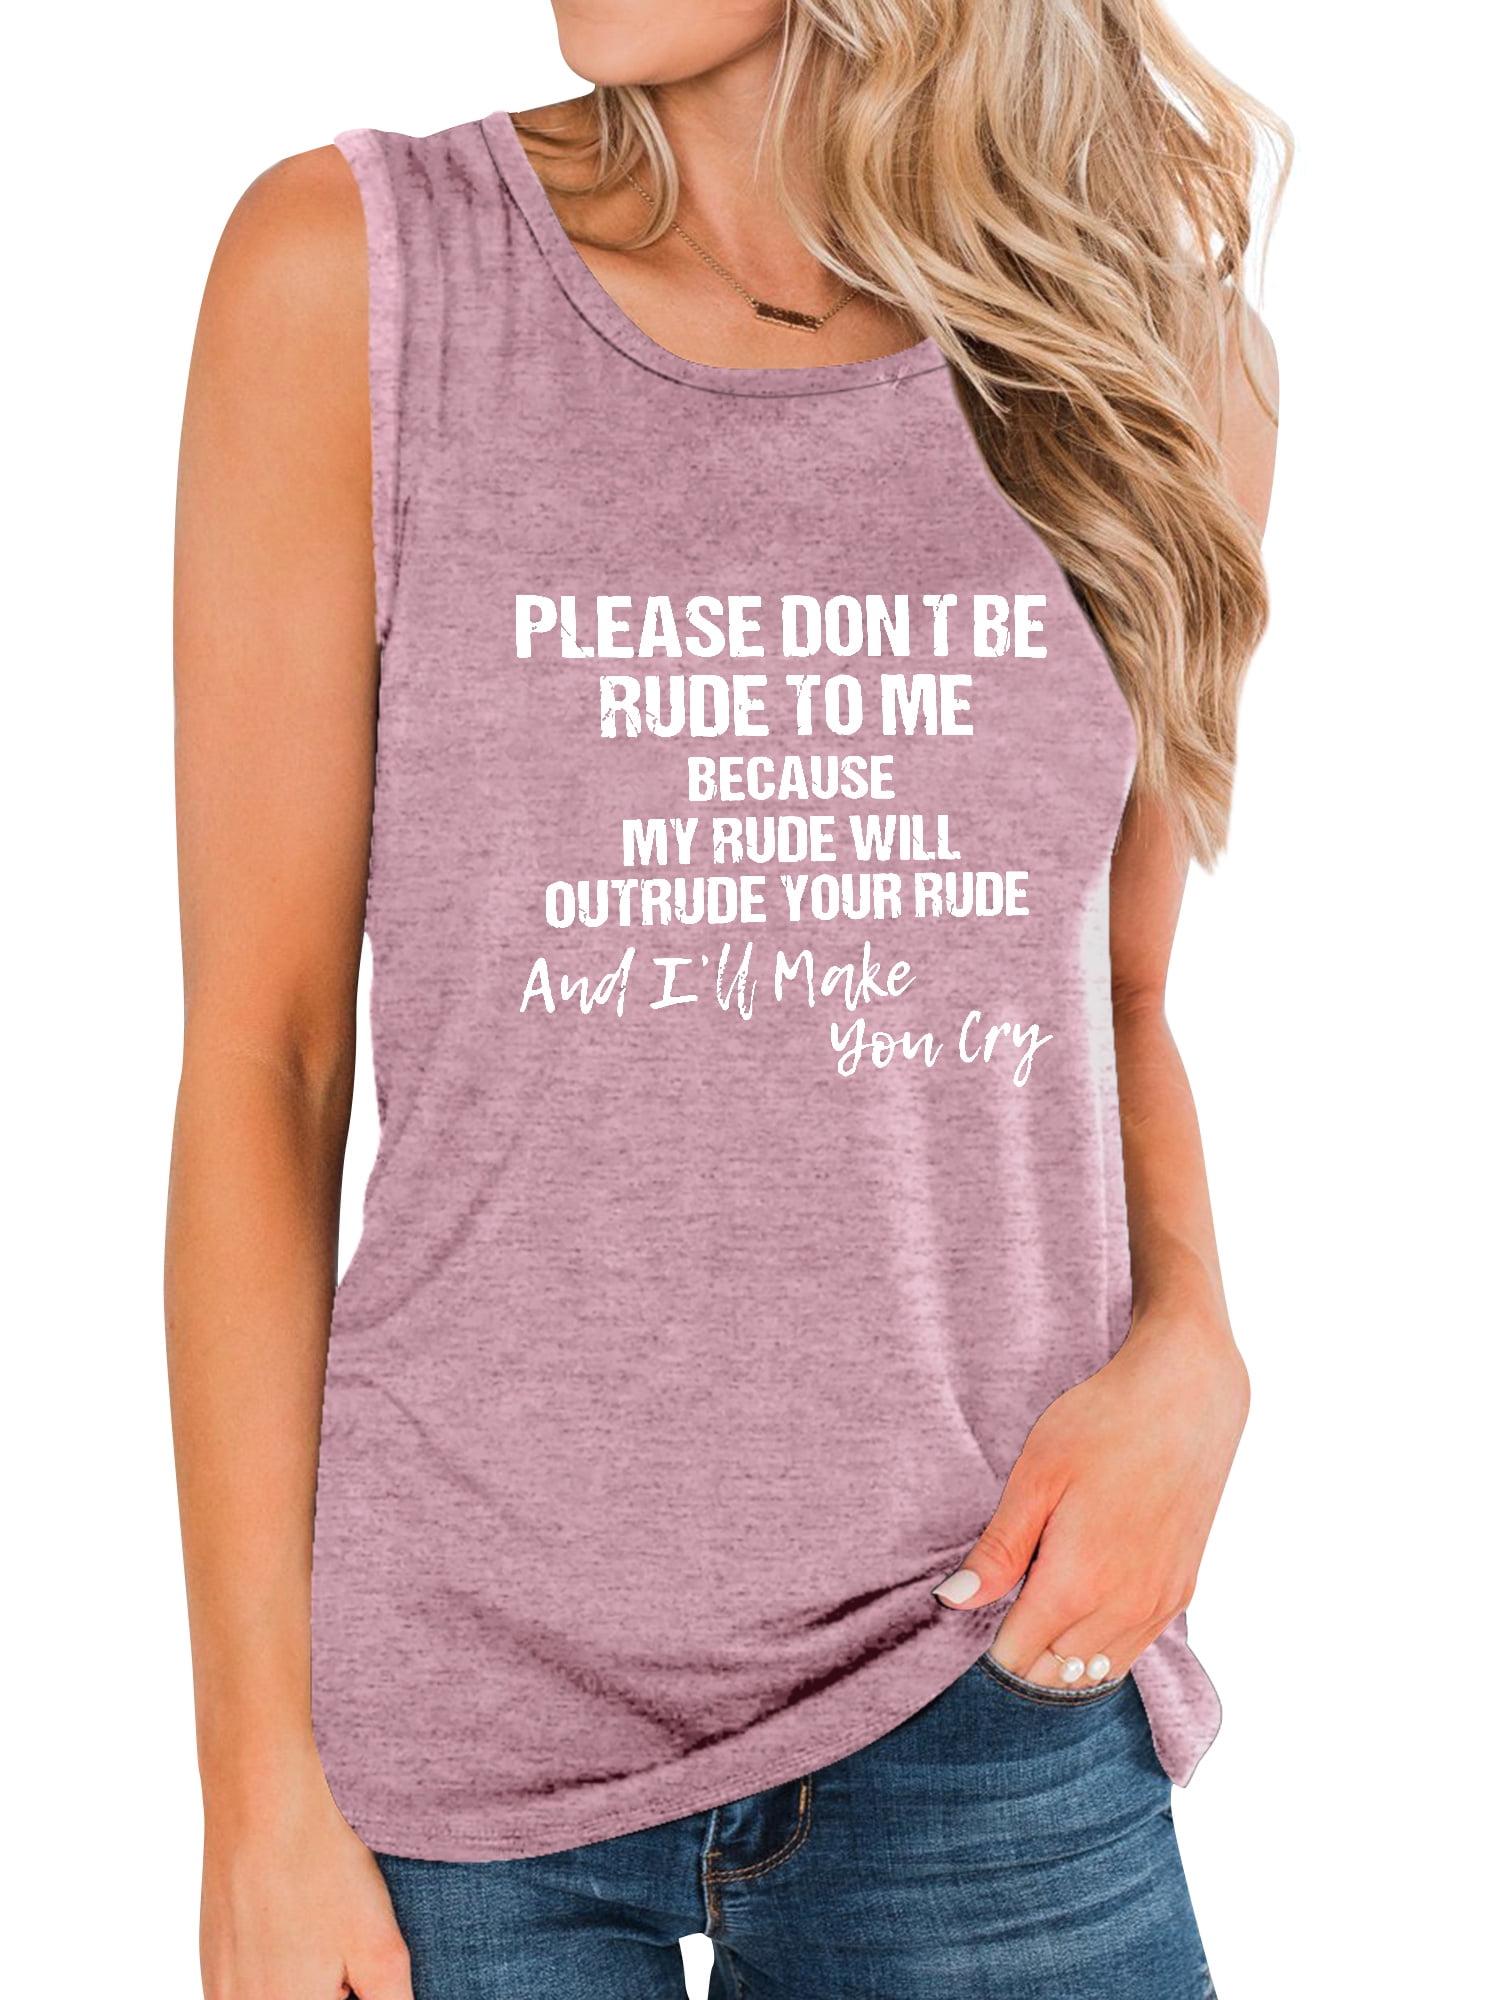 Mad Over Shirts My Hair is Too Nice for My Life to be Like This Unisex Premium Racerback Tank top